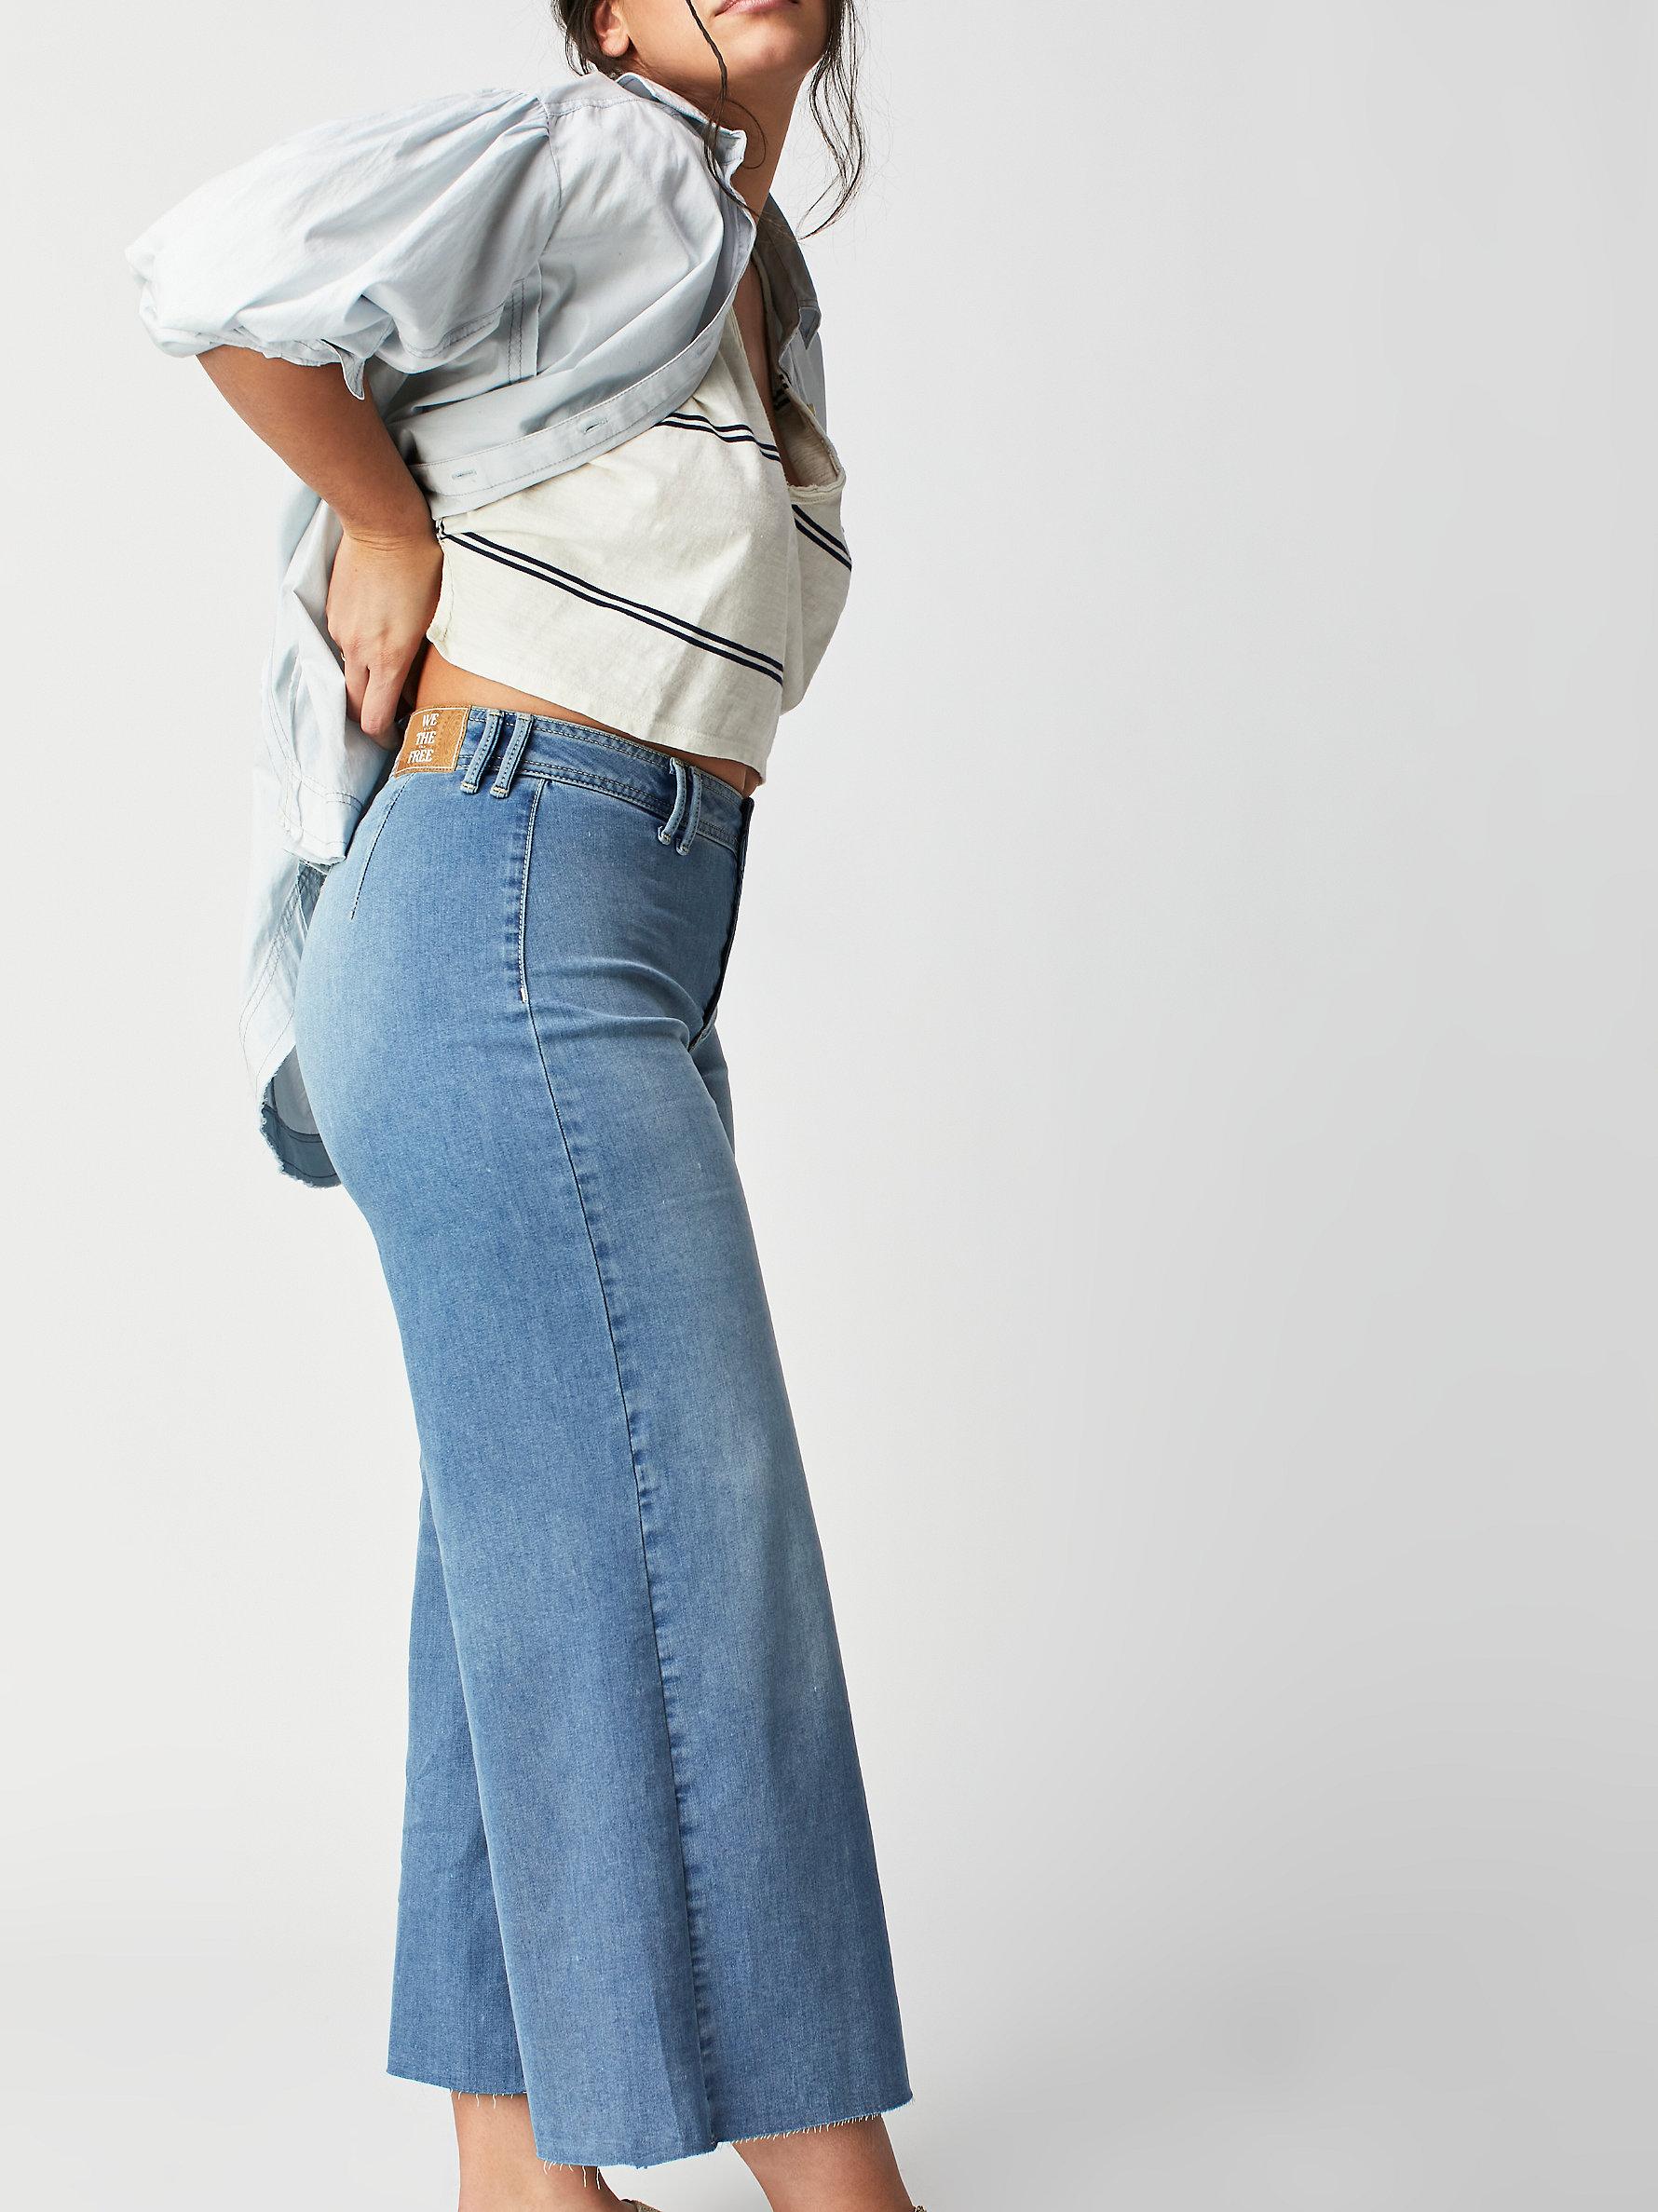 Free People Crvy Counter Culture Jeans in Blue | Lyst